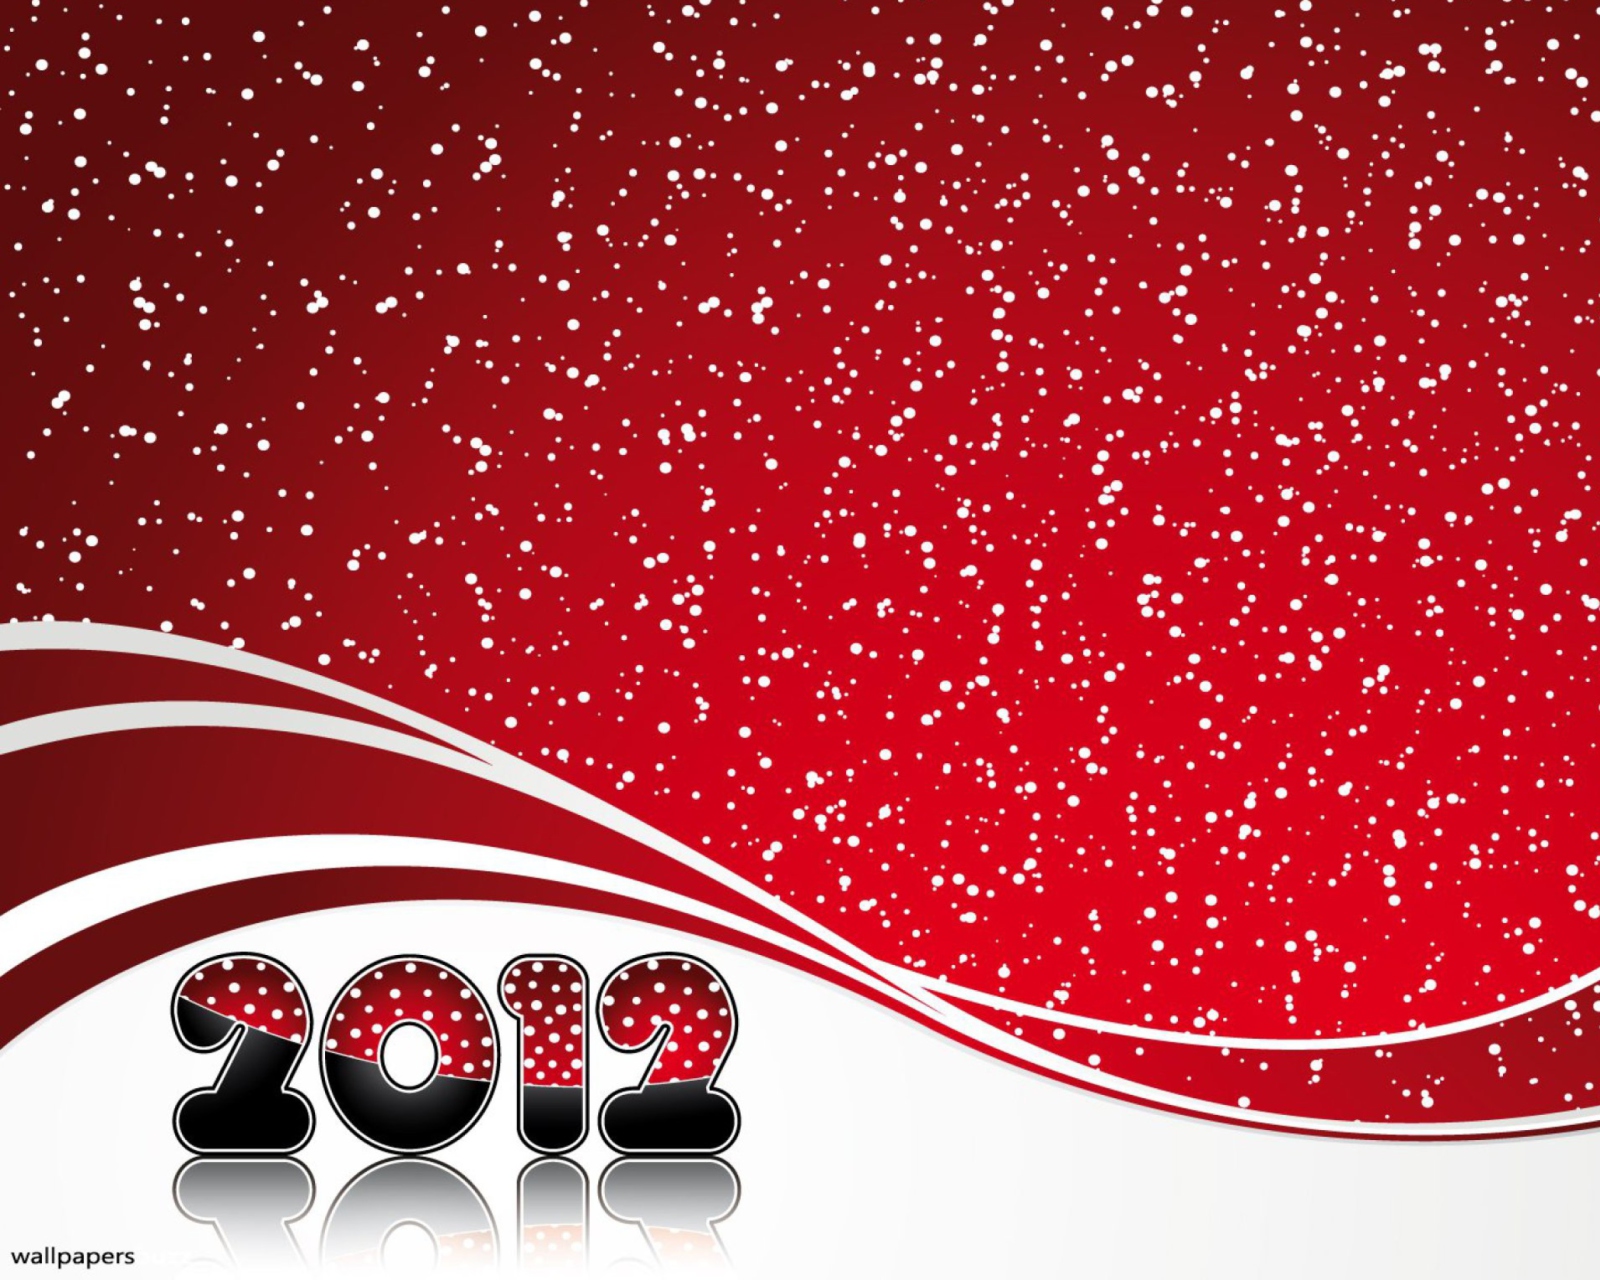 Das Red Snow New Year Wallpaper 1600x1280